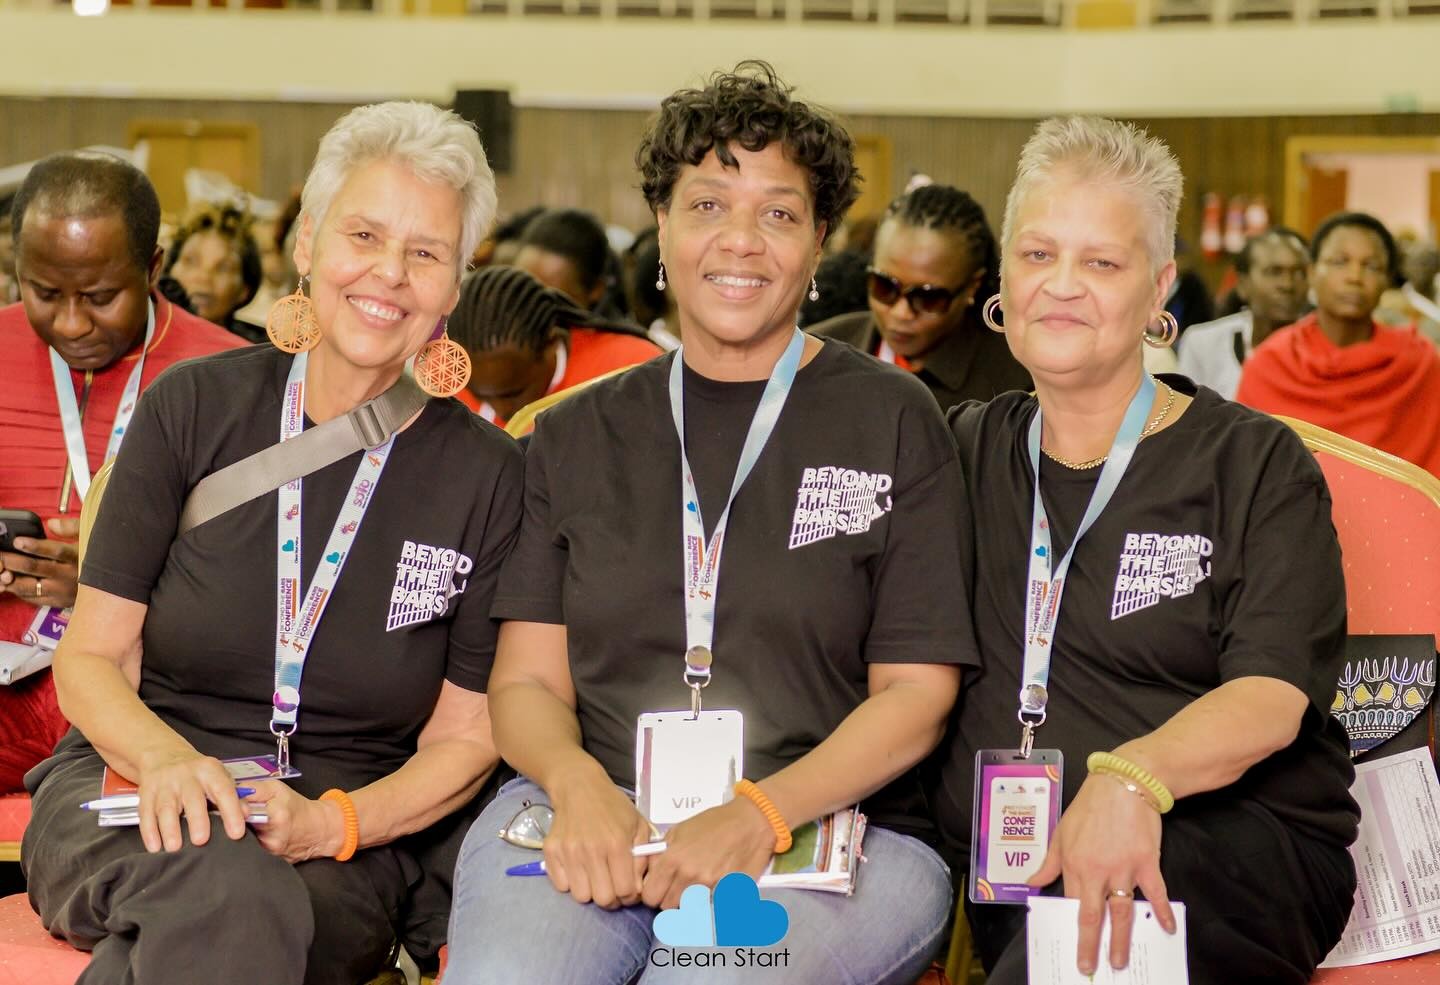 Three women sitting together and smiling for the photo wearing black Beyond the Bars t-shirts